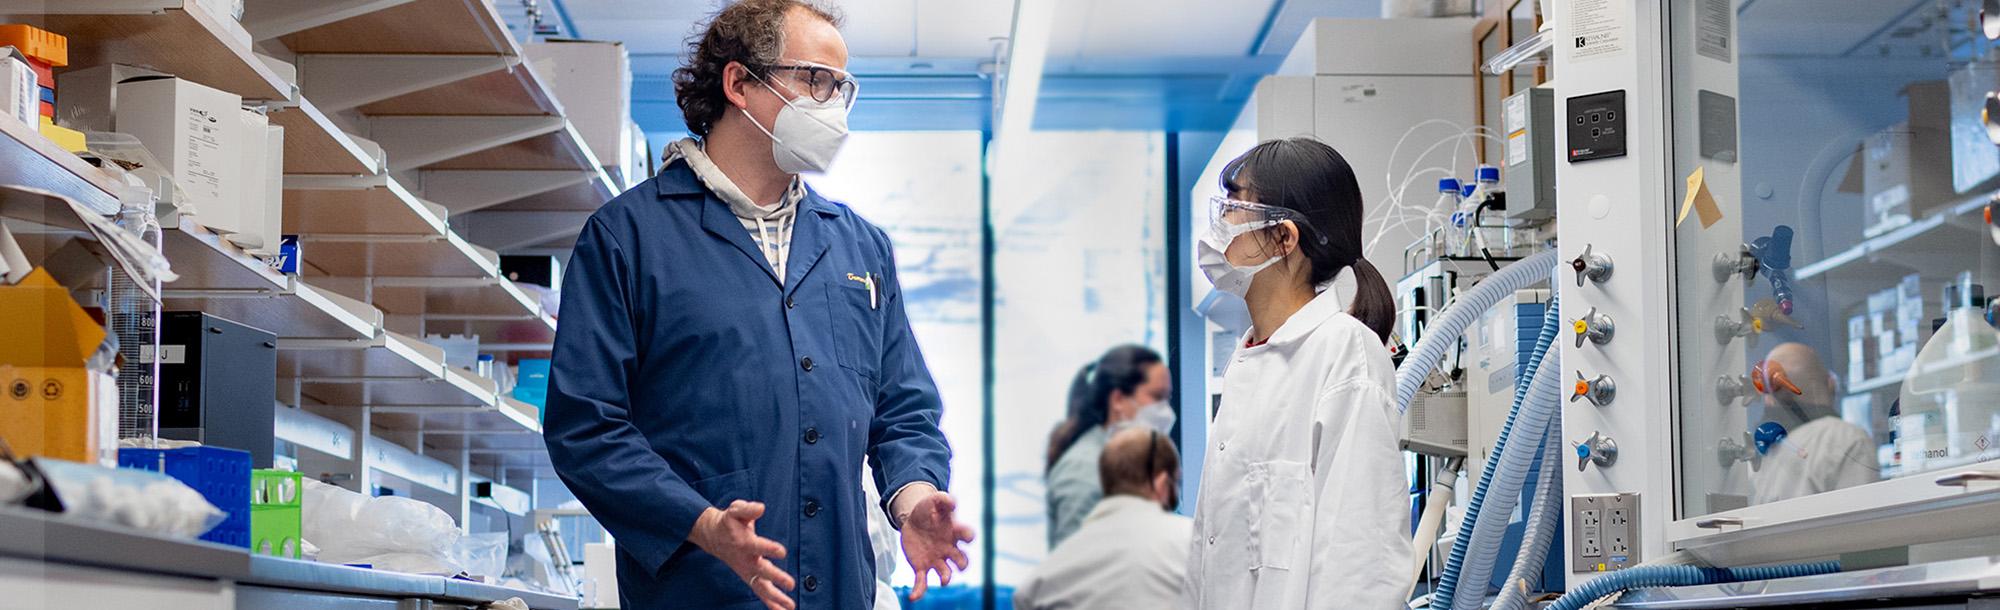 Two people wearing masks and talking in a lab